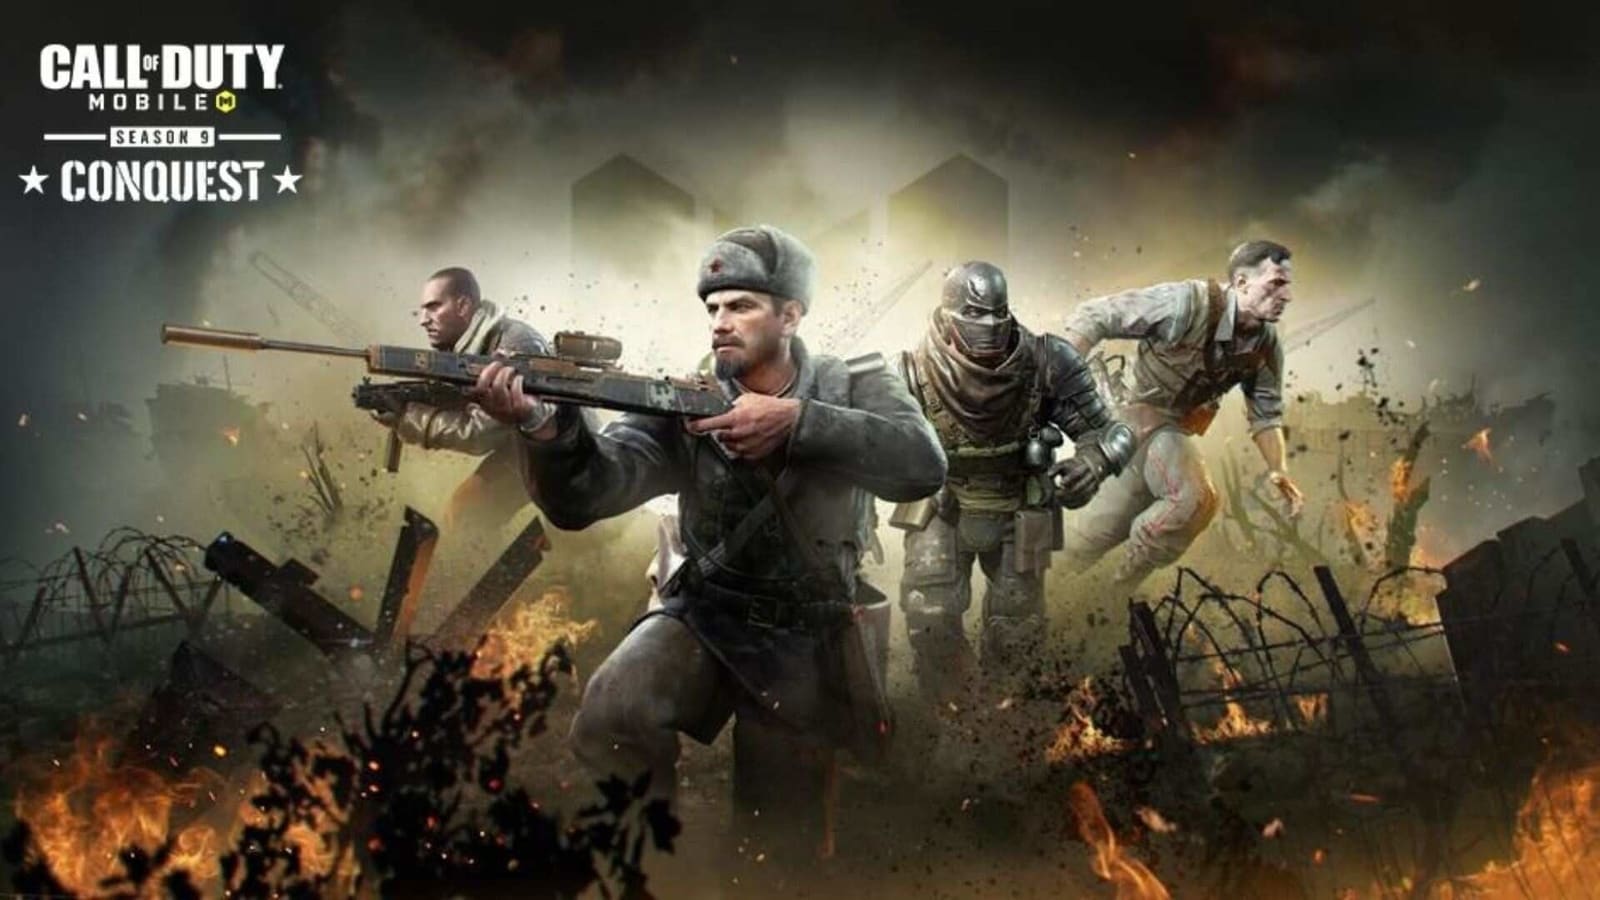 Call of duty mobile garena free fire witness spike in downloads after pubg mobile ban in india gaming news